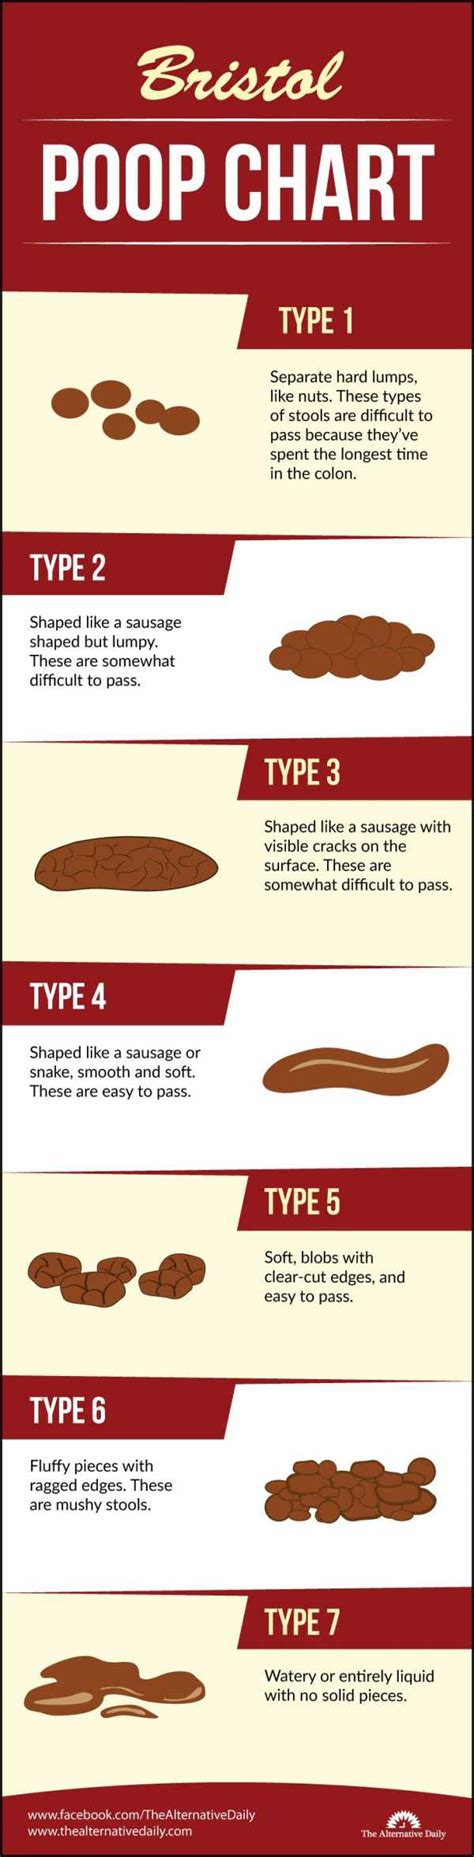 Bristol Poop Chart: Which Of These 7 Types Of Poop Do You Have?